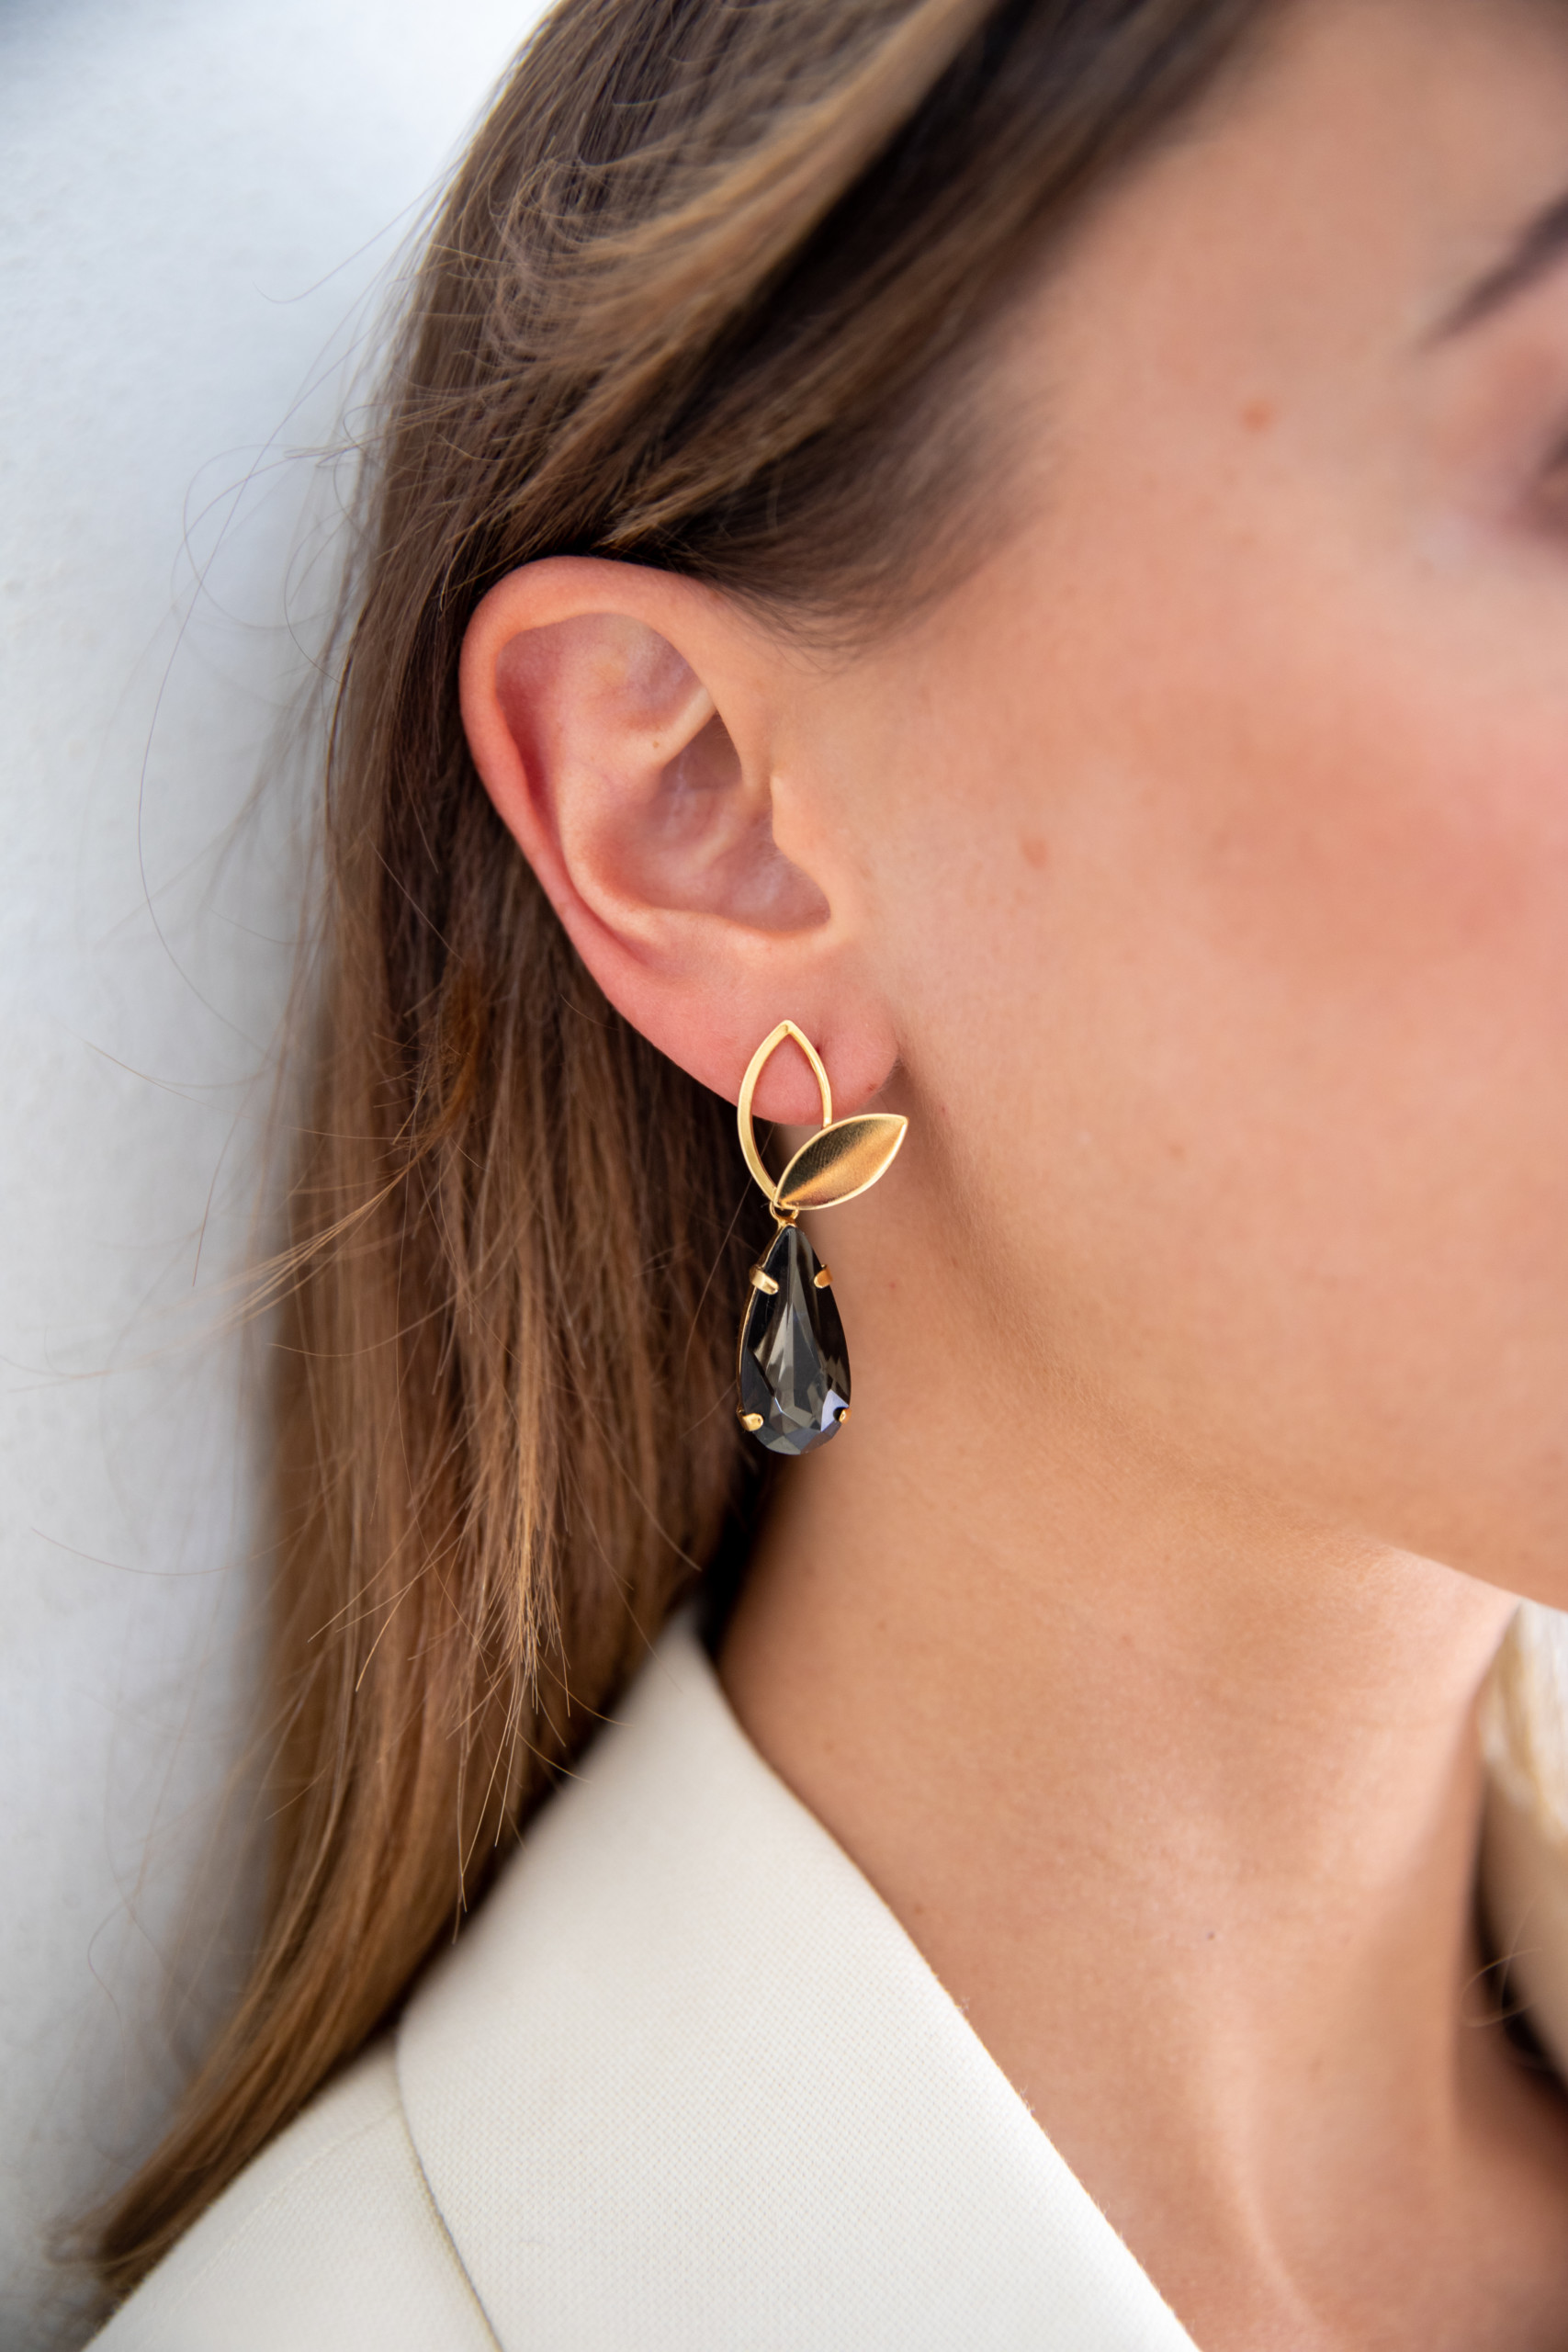 Iris chic anthracite gold earrings